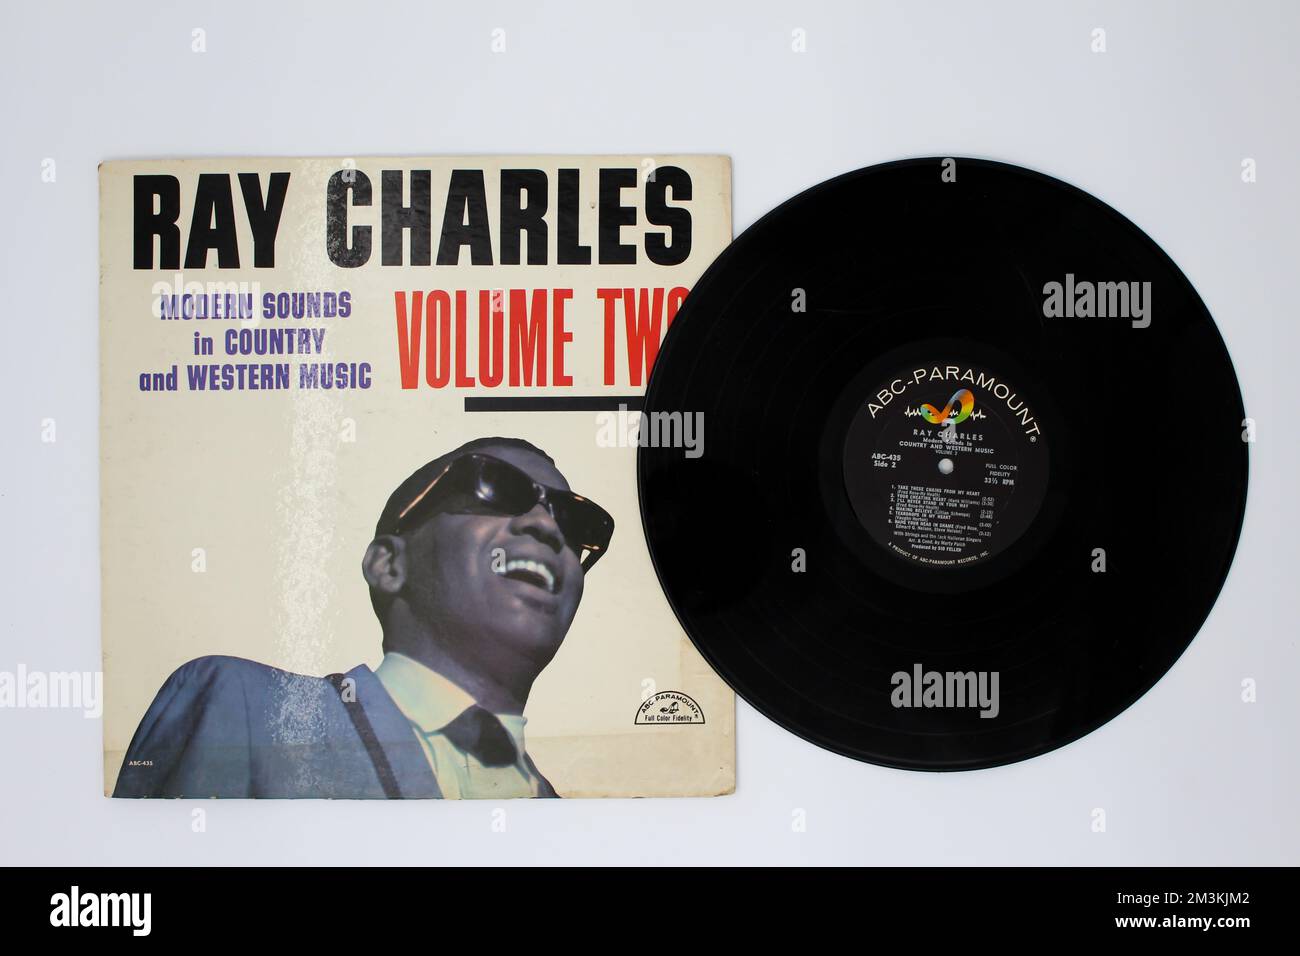 Funk and soul blues and jazz artist, Ray Charles music album on vinyl record LP. Titled Modern Sounds in Country and Western Music Volume Two cover Stock Photo